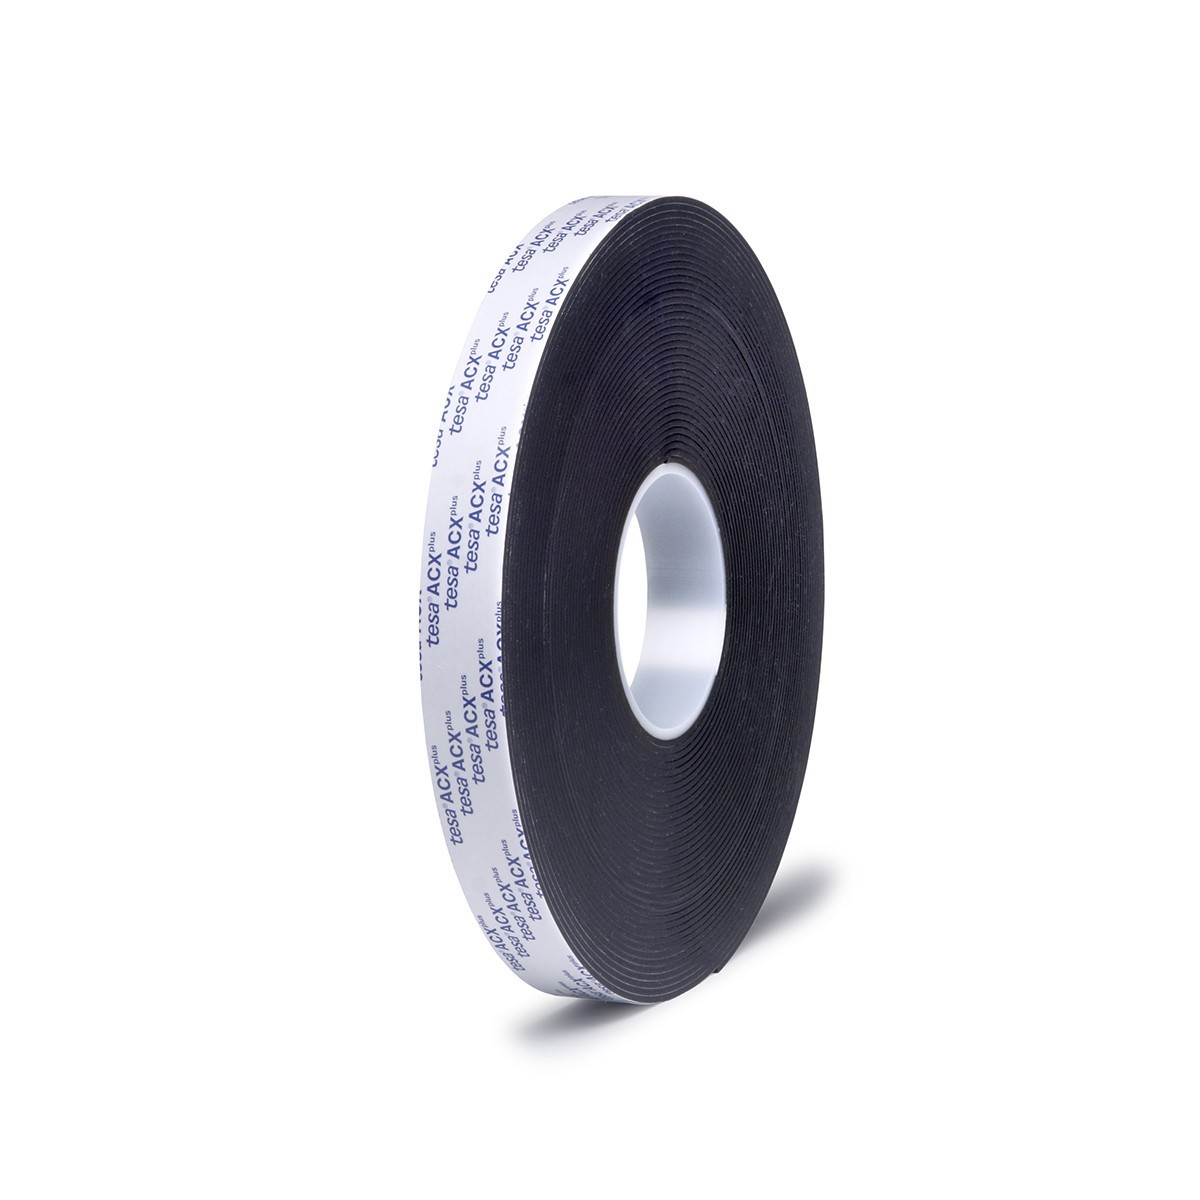 Super Seam Tape High Strength Instant Bonding 4 in. x 36 yds, from Best Materials